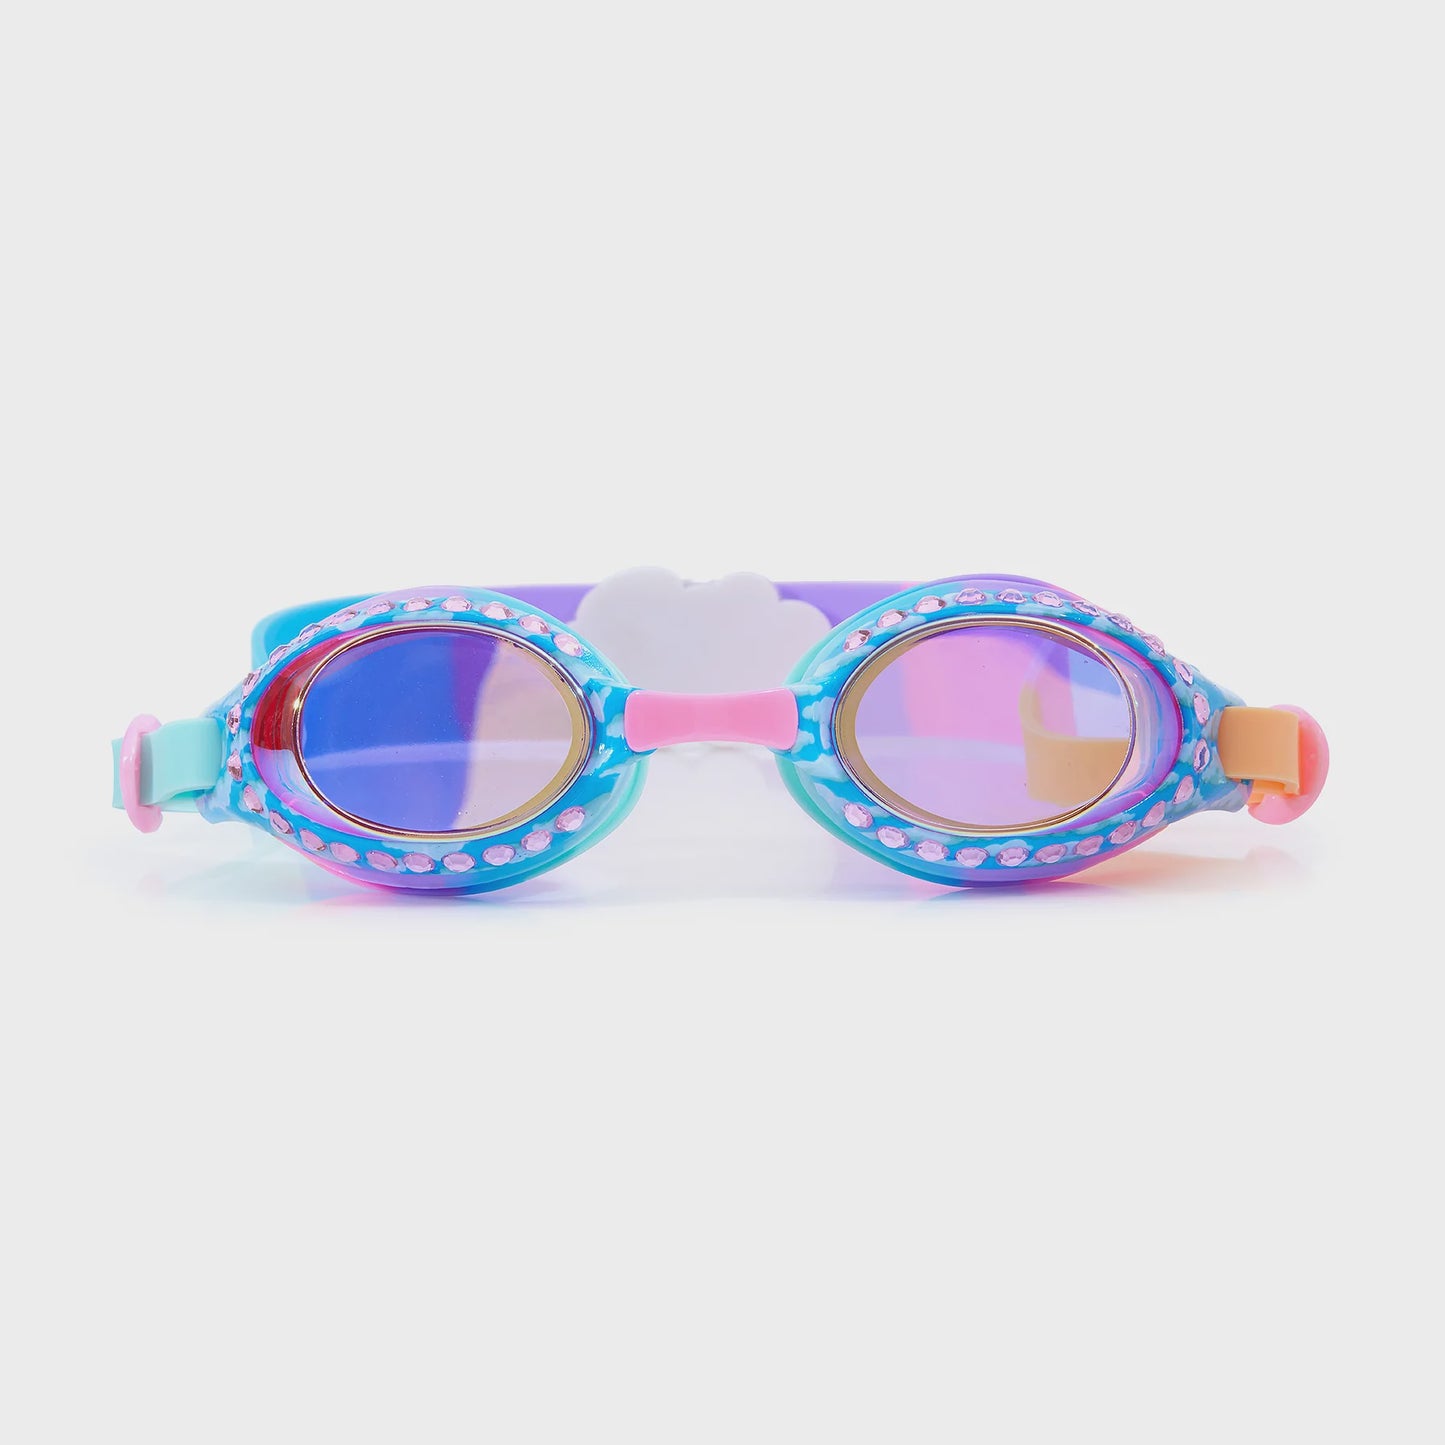 Bling2o Goggles - Sunny Day - Cloud Blue